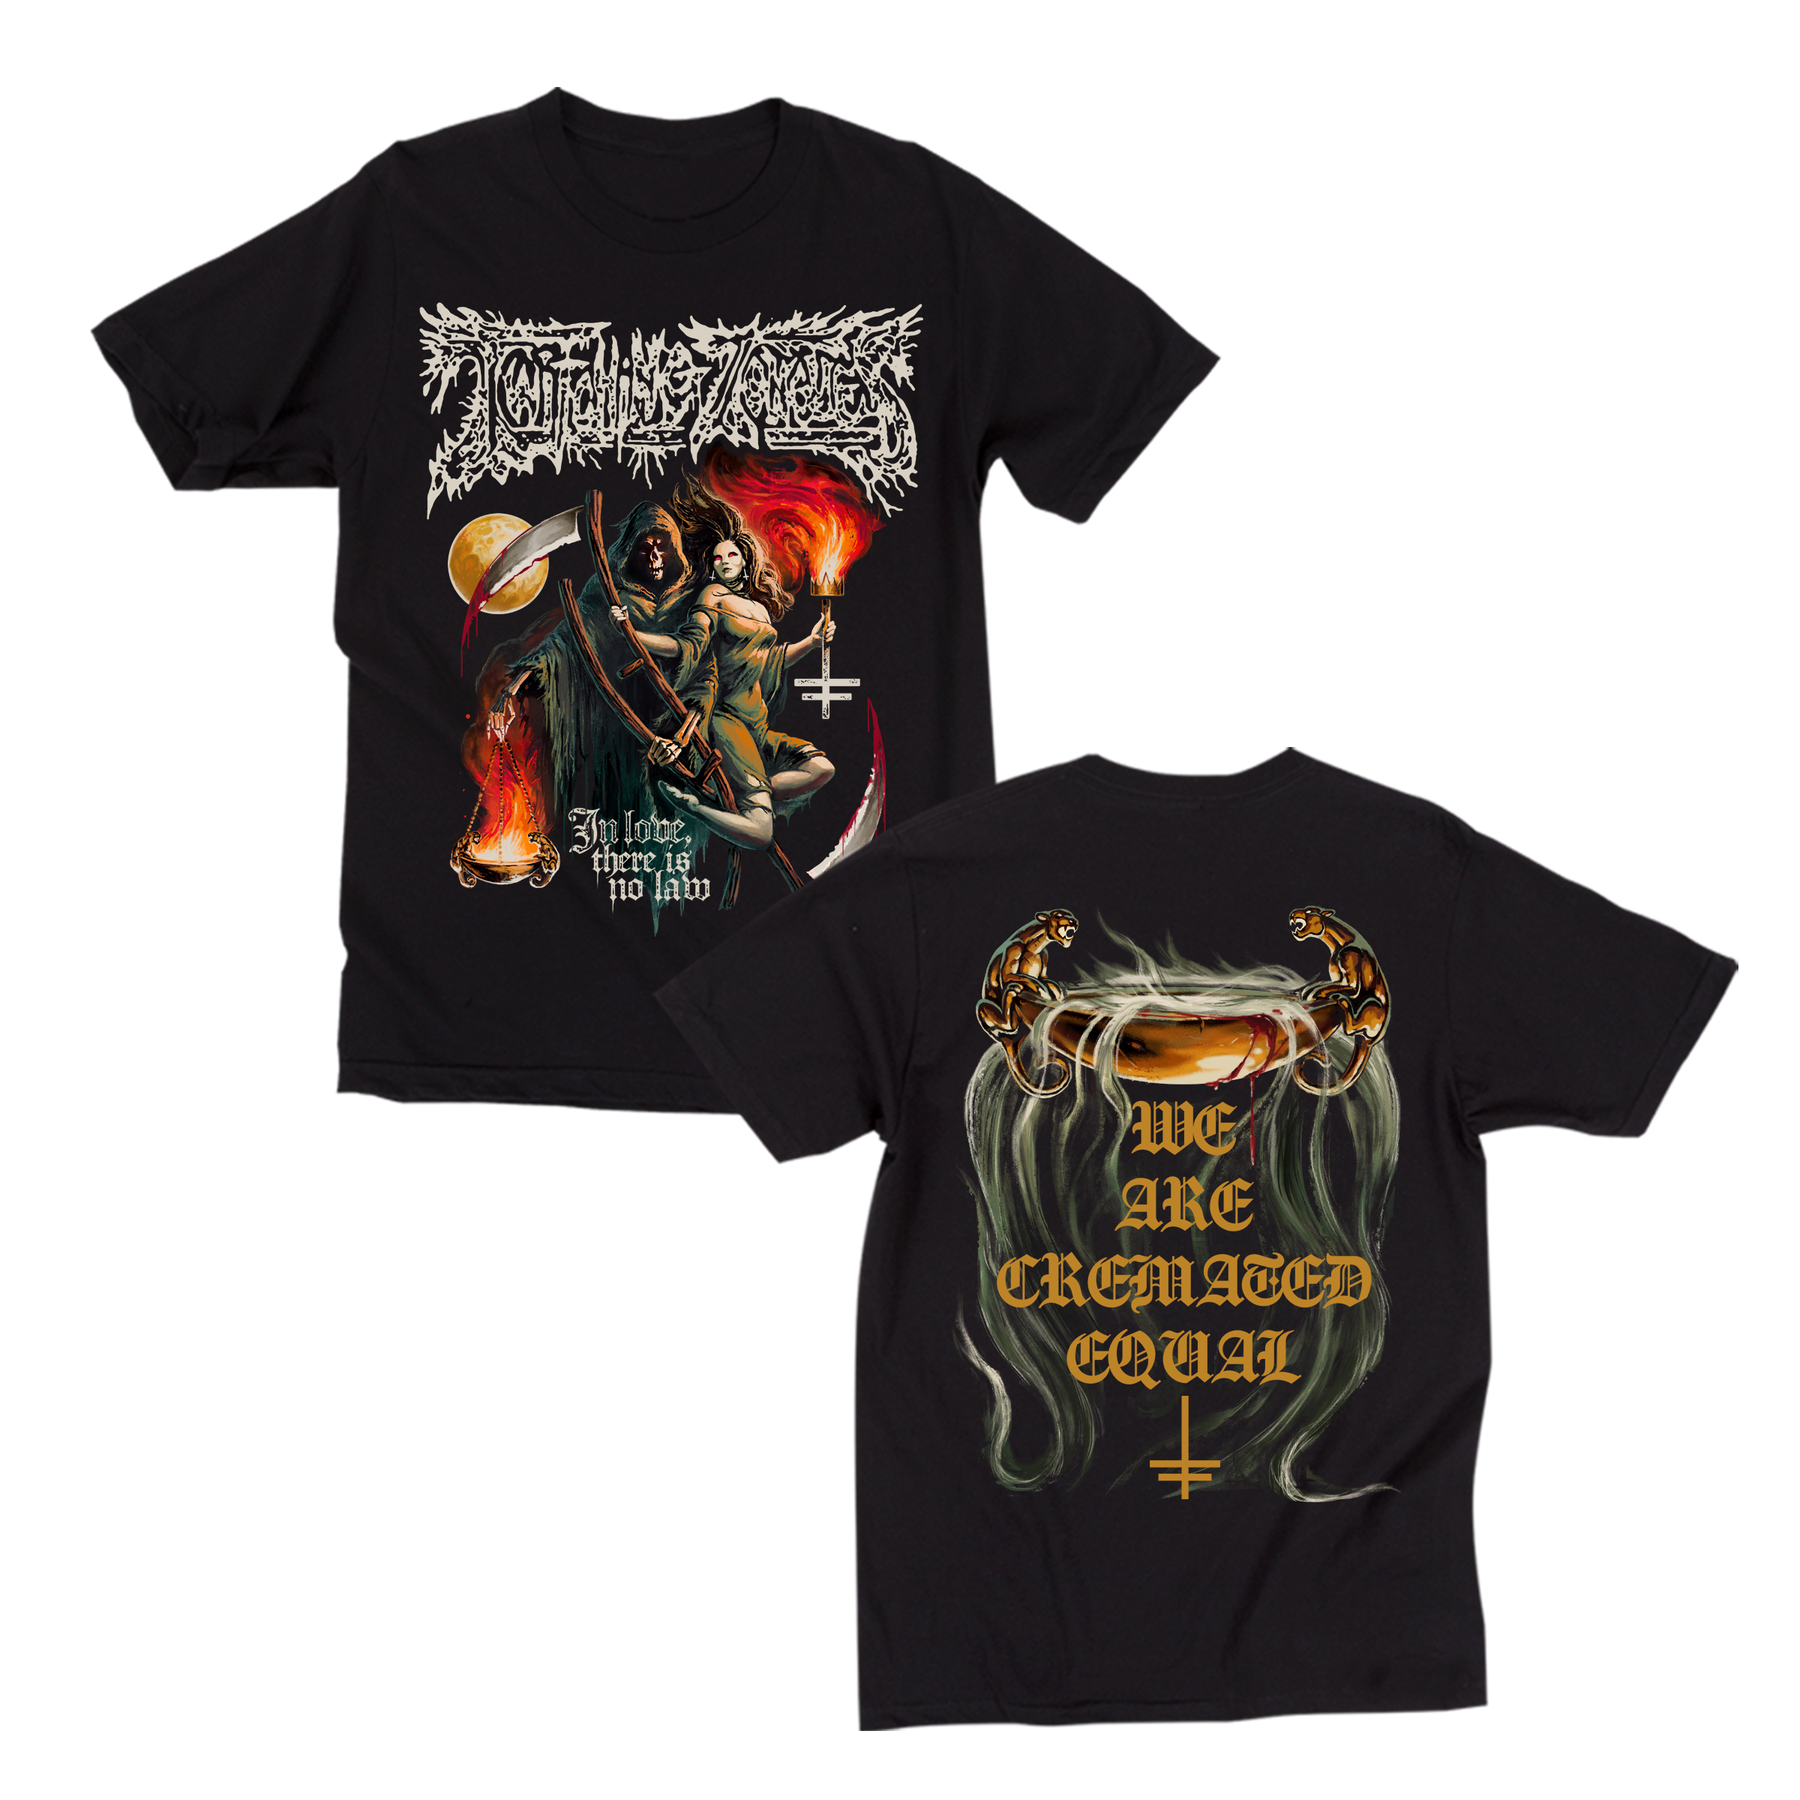 Twitching Tongues - Cremated Equal T-Shirt